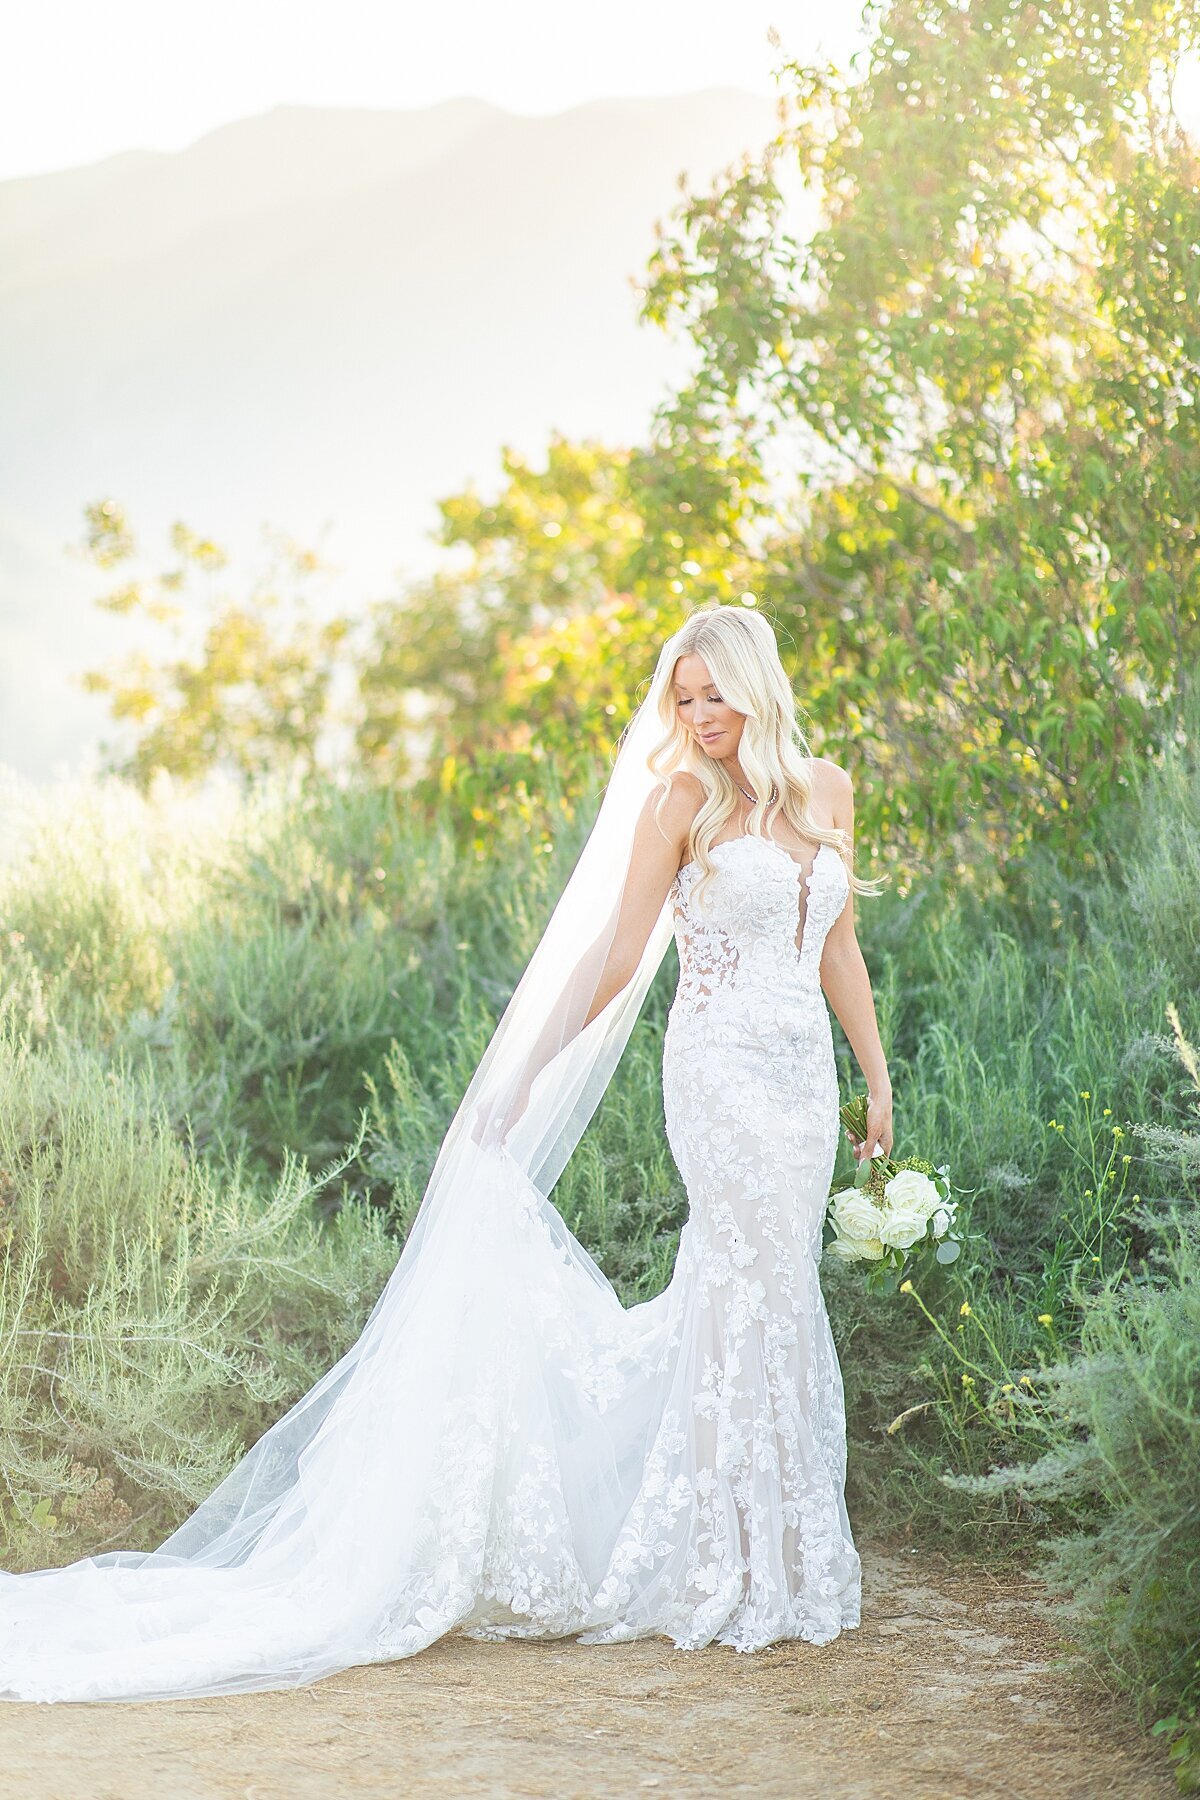 Bride holding gown at Circle Oak Ranch Estate in Fallbrook by Bree Sherr.